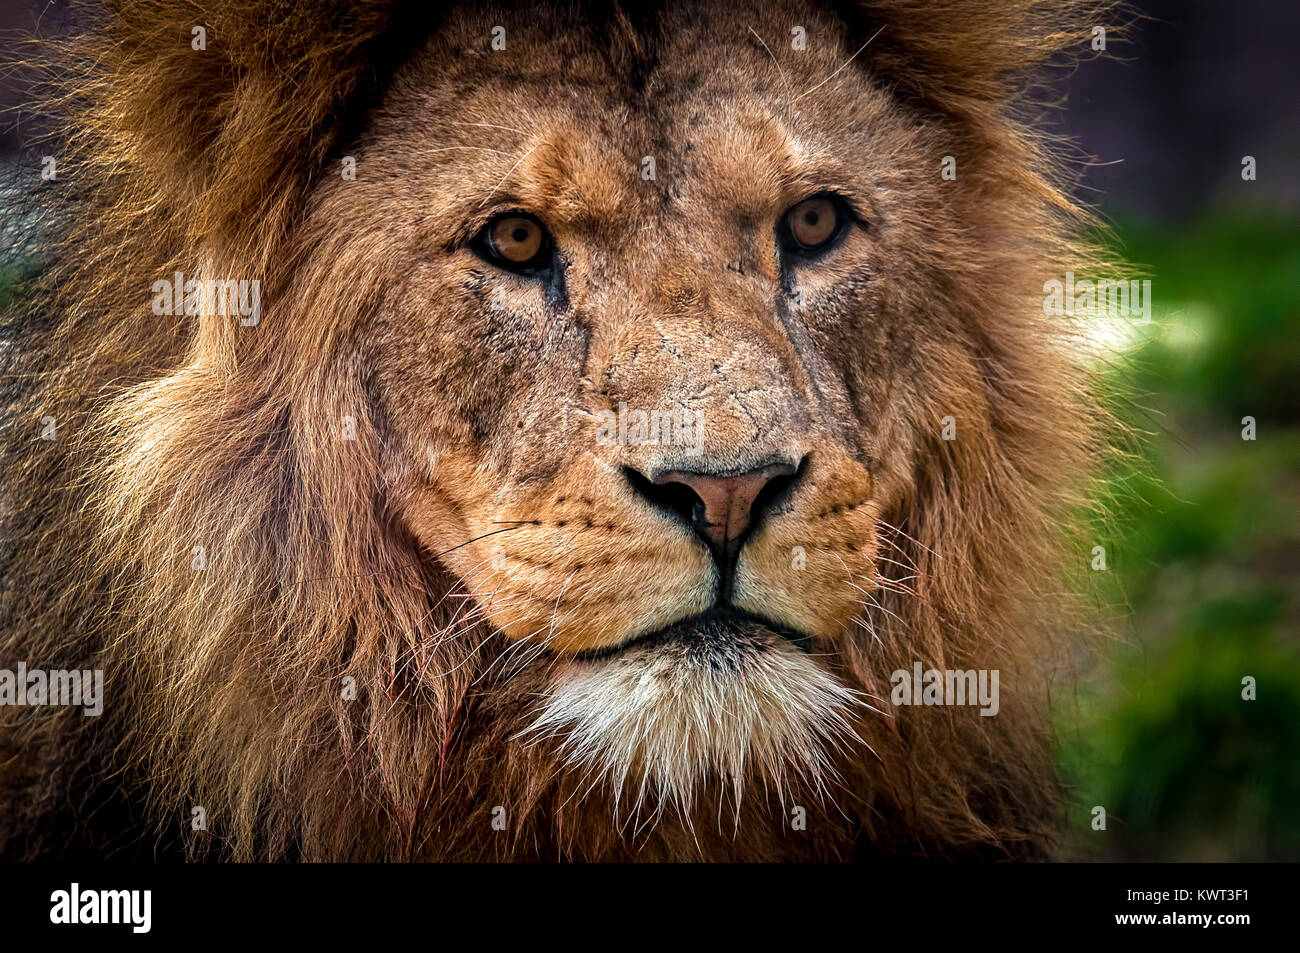 Close up of a lion's face Stock Photo